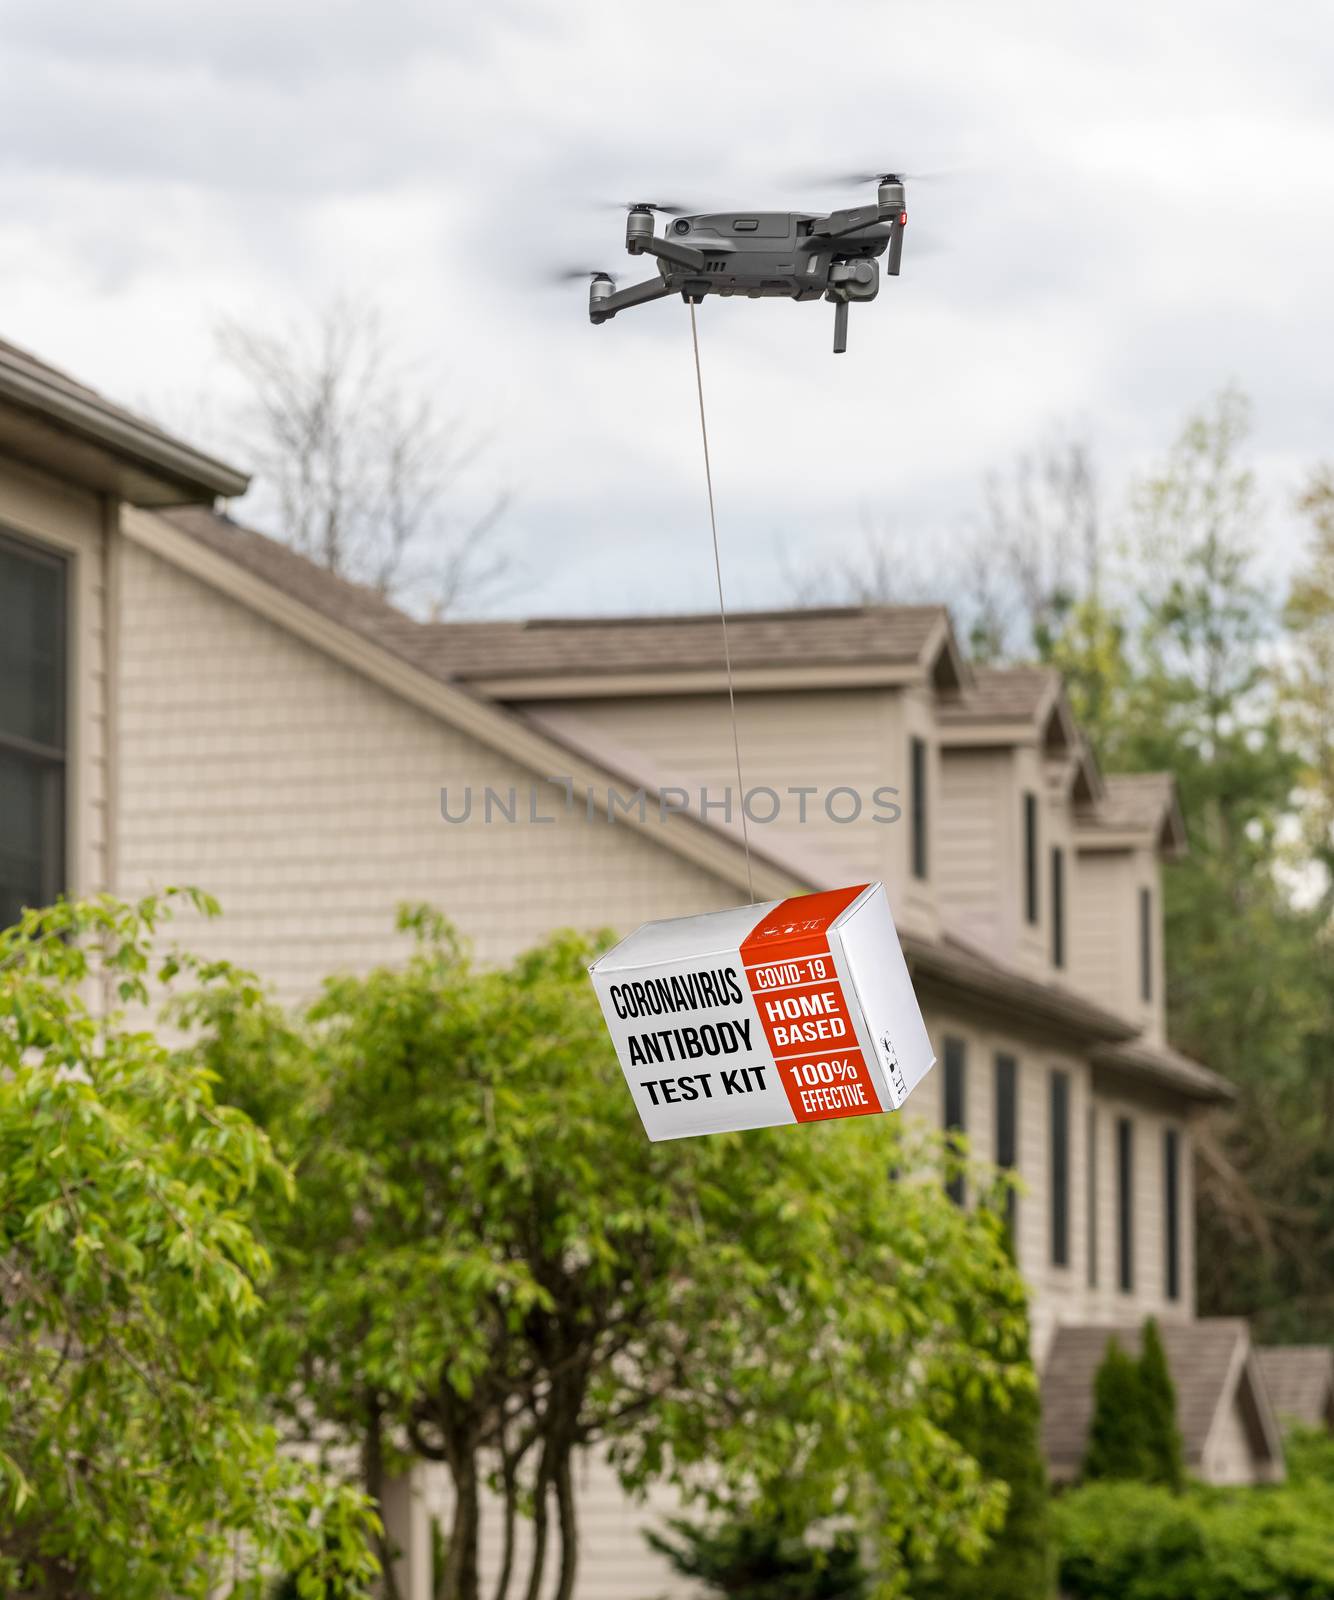 Drone delivering a coronavirus home test kit to residential house by steheap